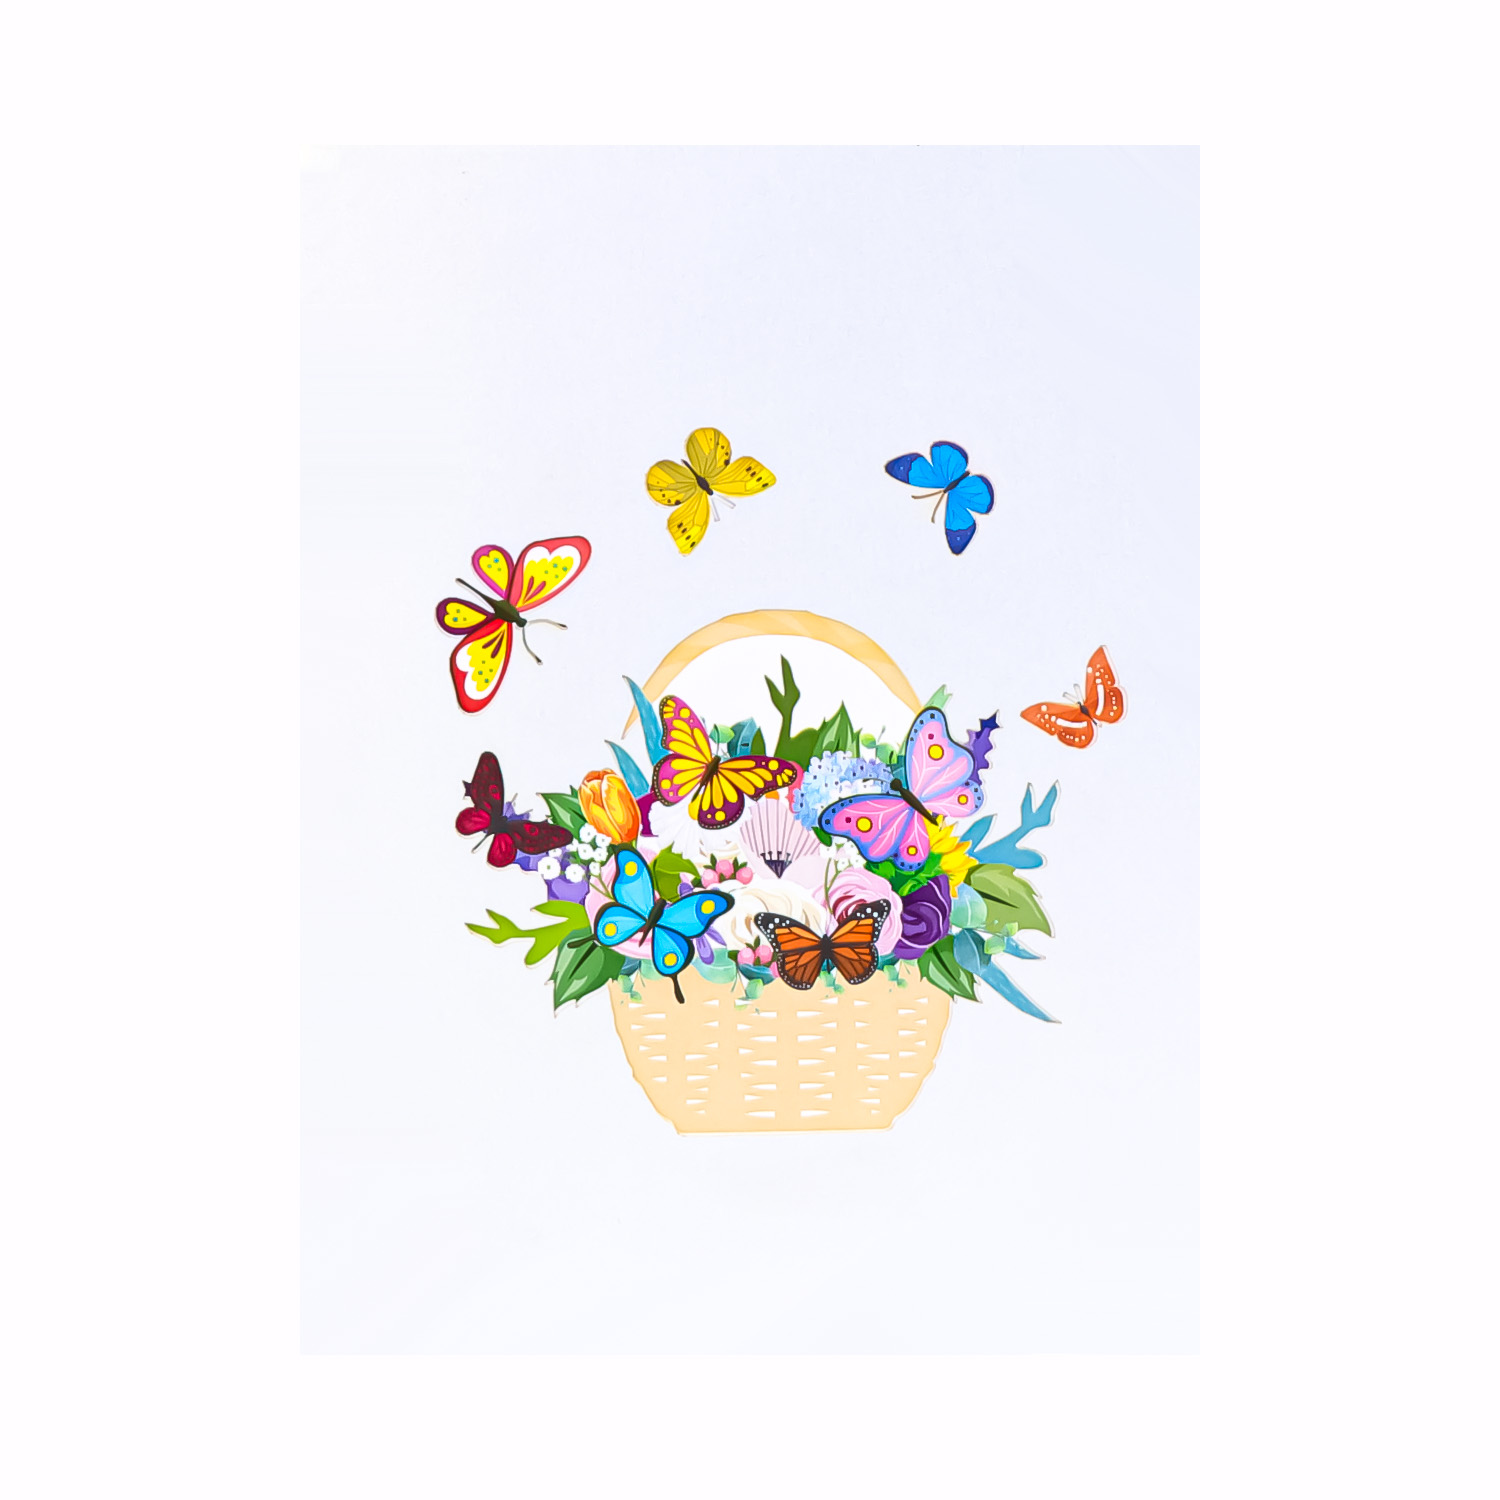 Wildflower-Butterflies-Pop-Up-Card-cover-wholesale-manufacture-custom-design-custom-mothers-day-card-pop-up-easter-cards